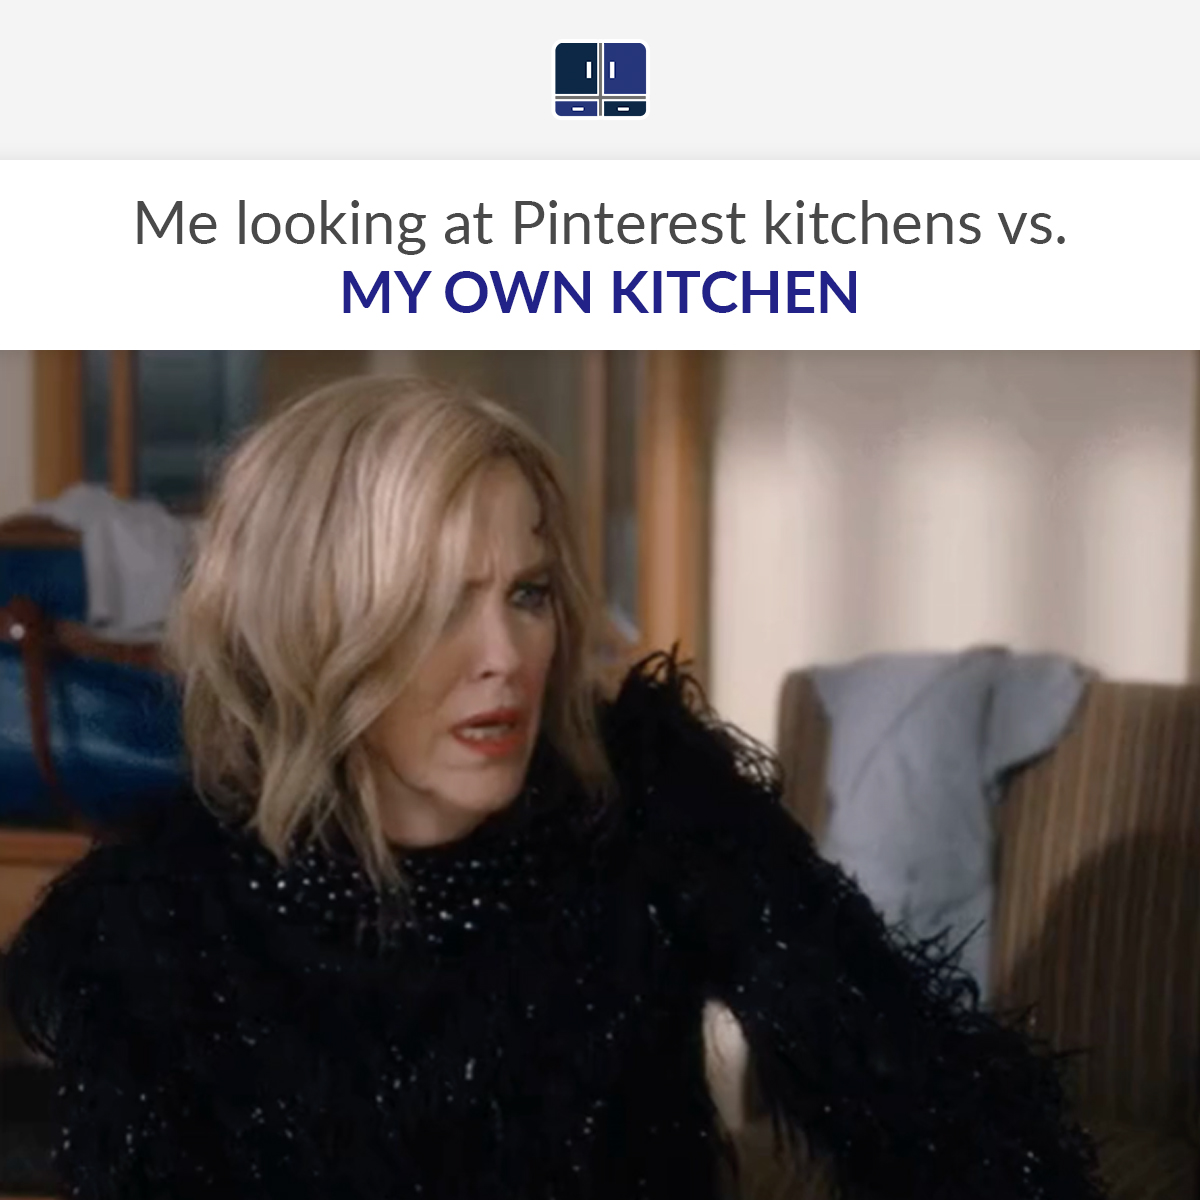 Me Looking at Pinterest Kitchens vs. My Own Kitchen